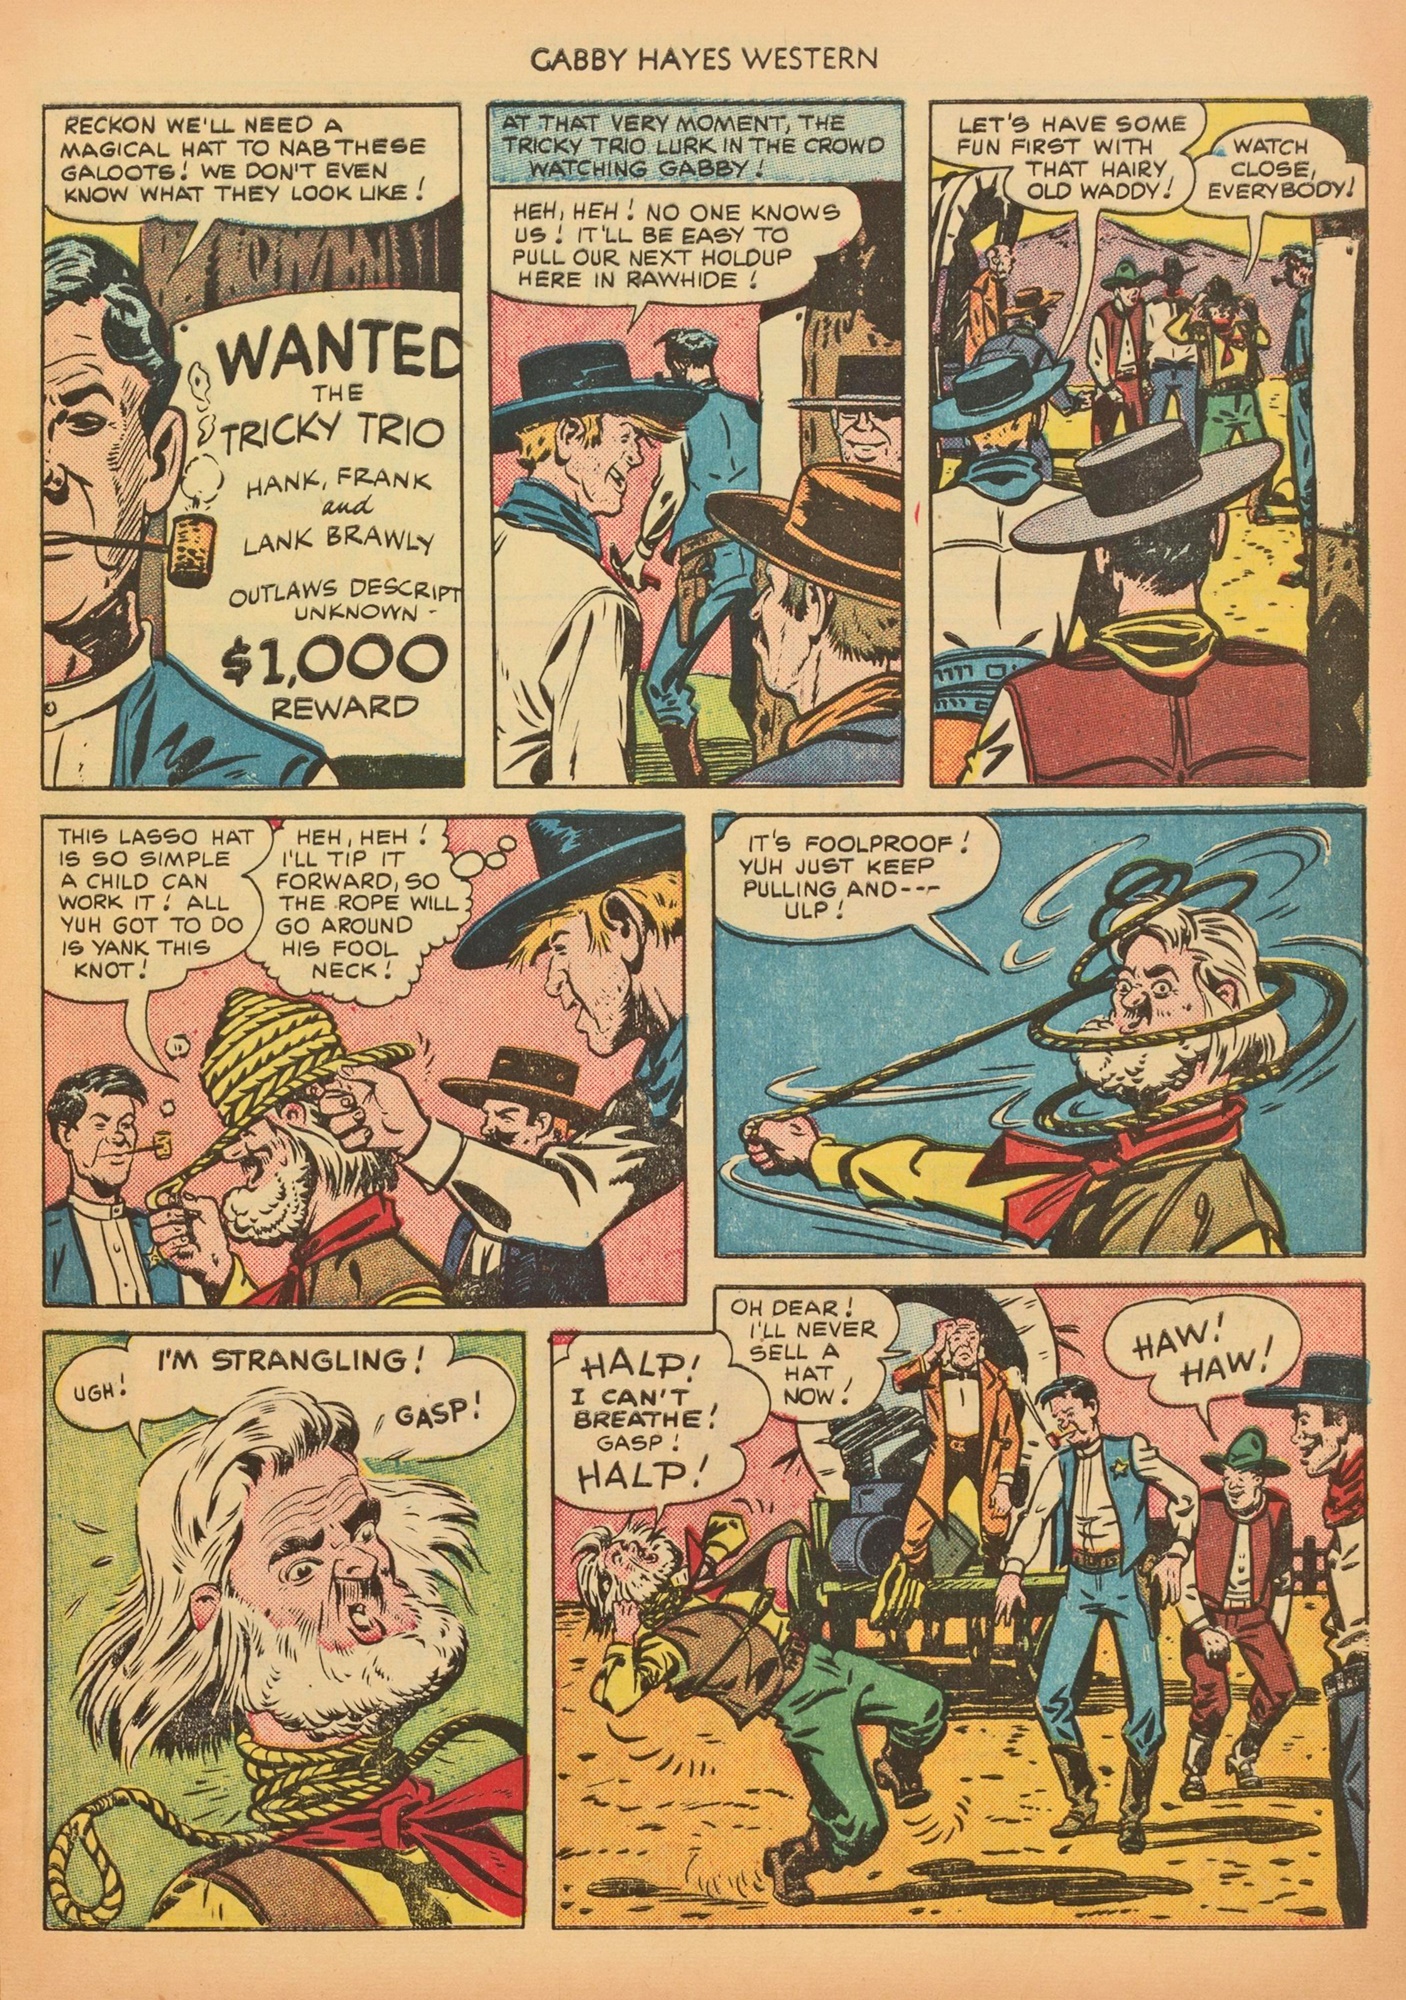 Read online Gabby Hayes Western comic -  Issue #25 - 21